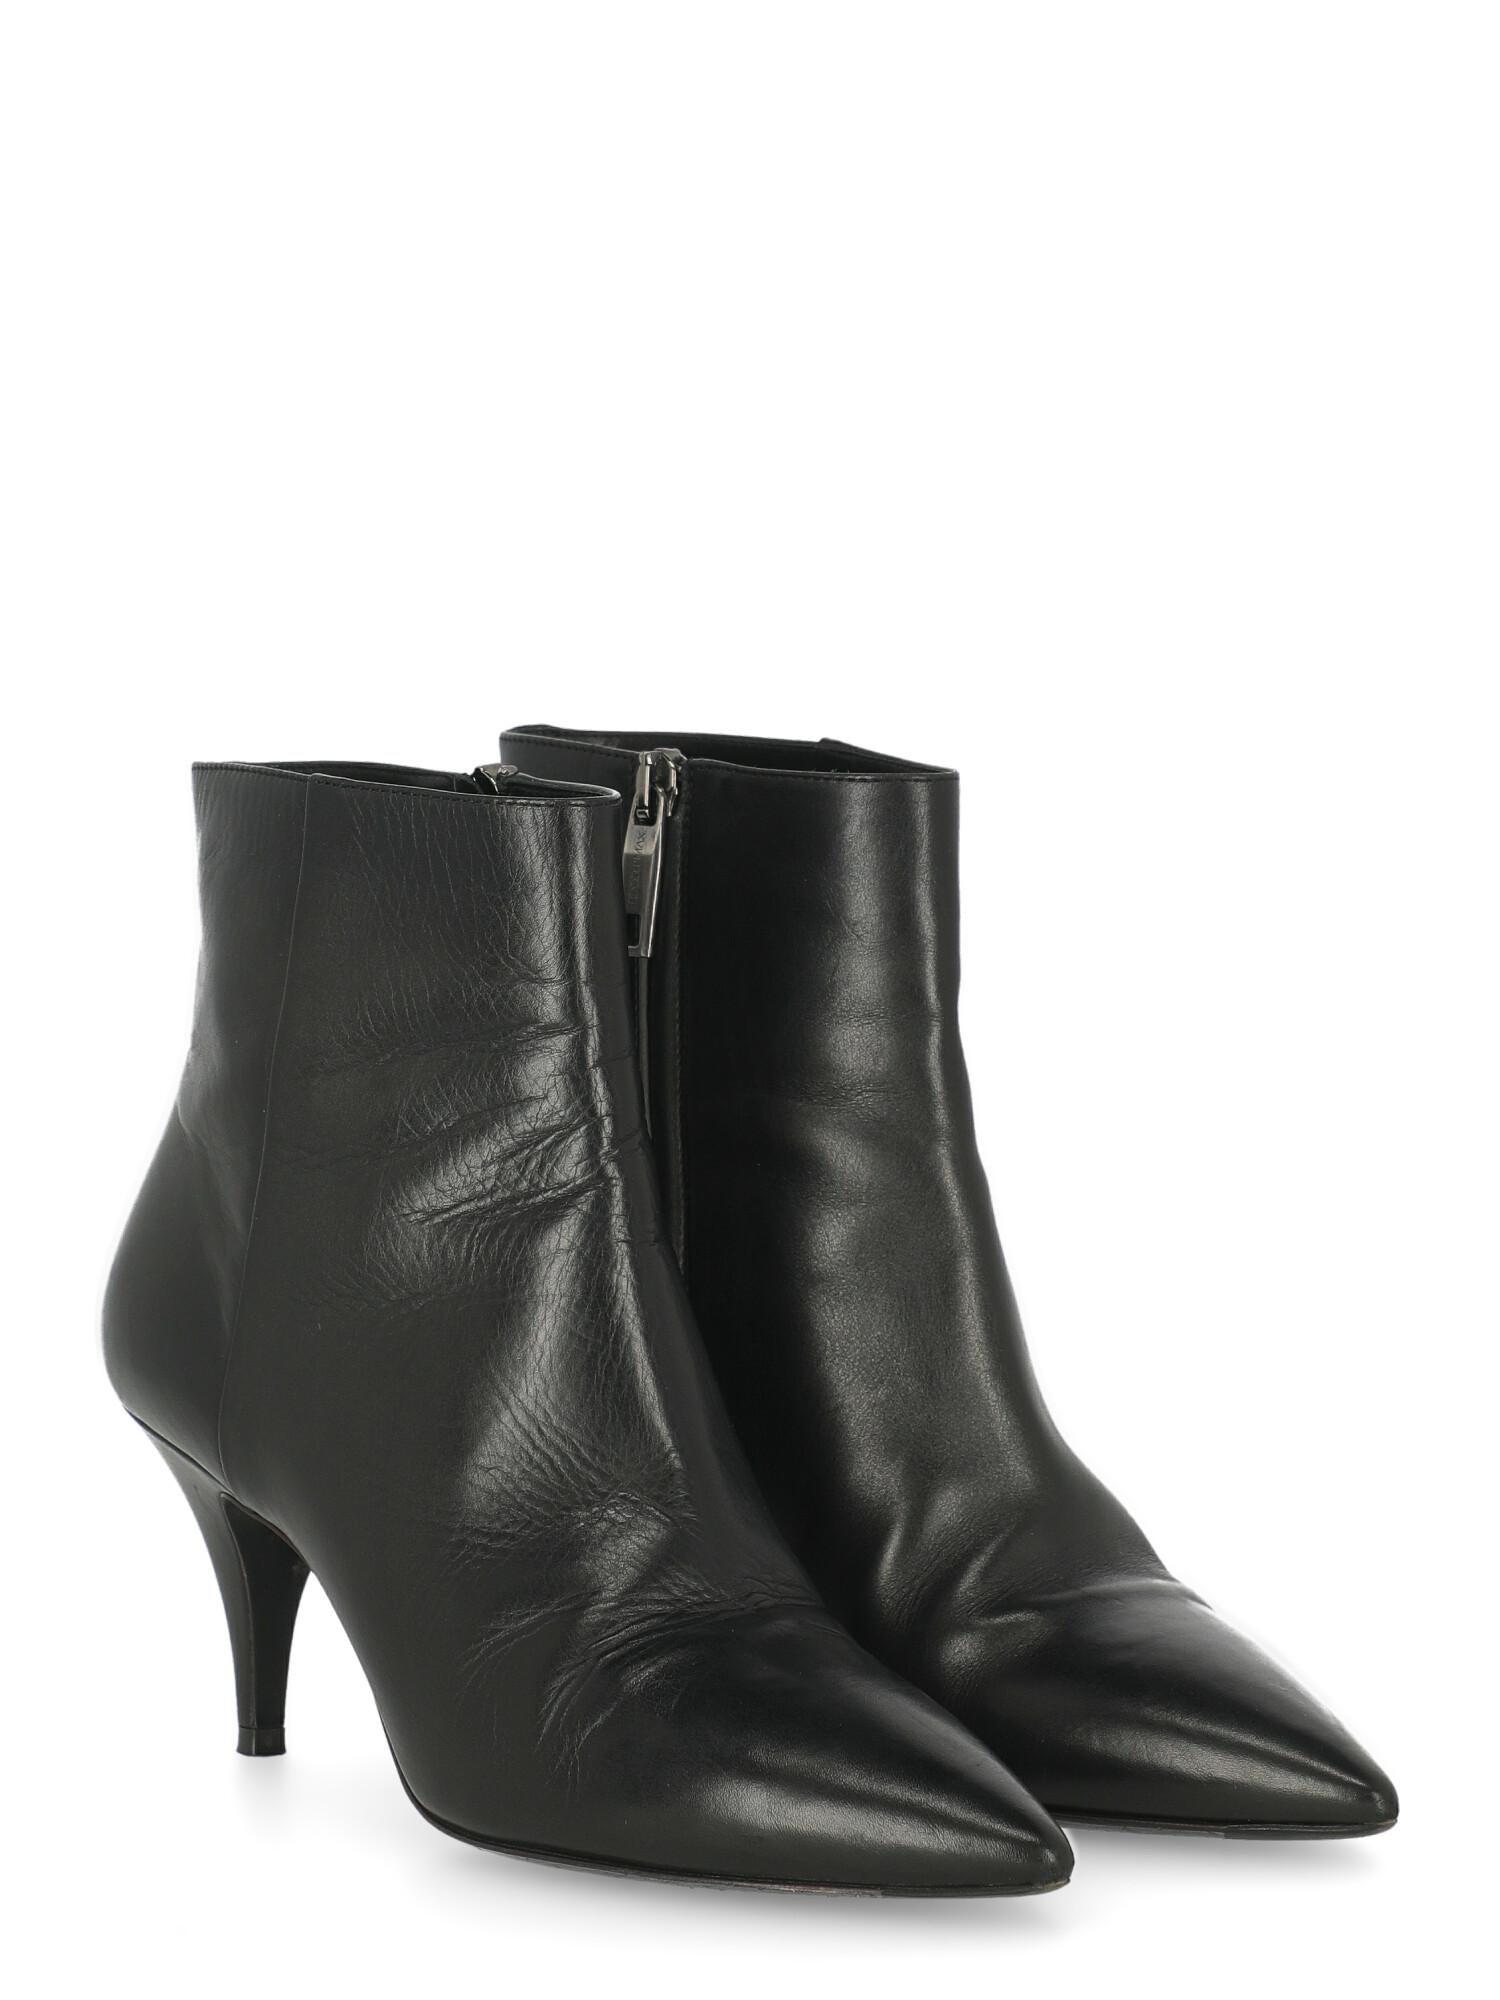 Ankle boots, leather, solid color, side fastening, silver-tone hardware, pointed toe, branded sole, tapered heel, mid heel.

Includes:
- Dust bag

Product Condition: Very Good
Heel: slightly visible scratches. Sole: visible signs of use. Upper: